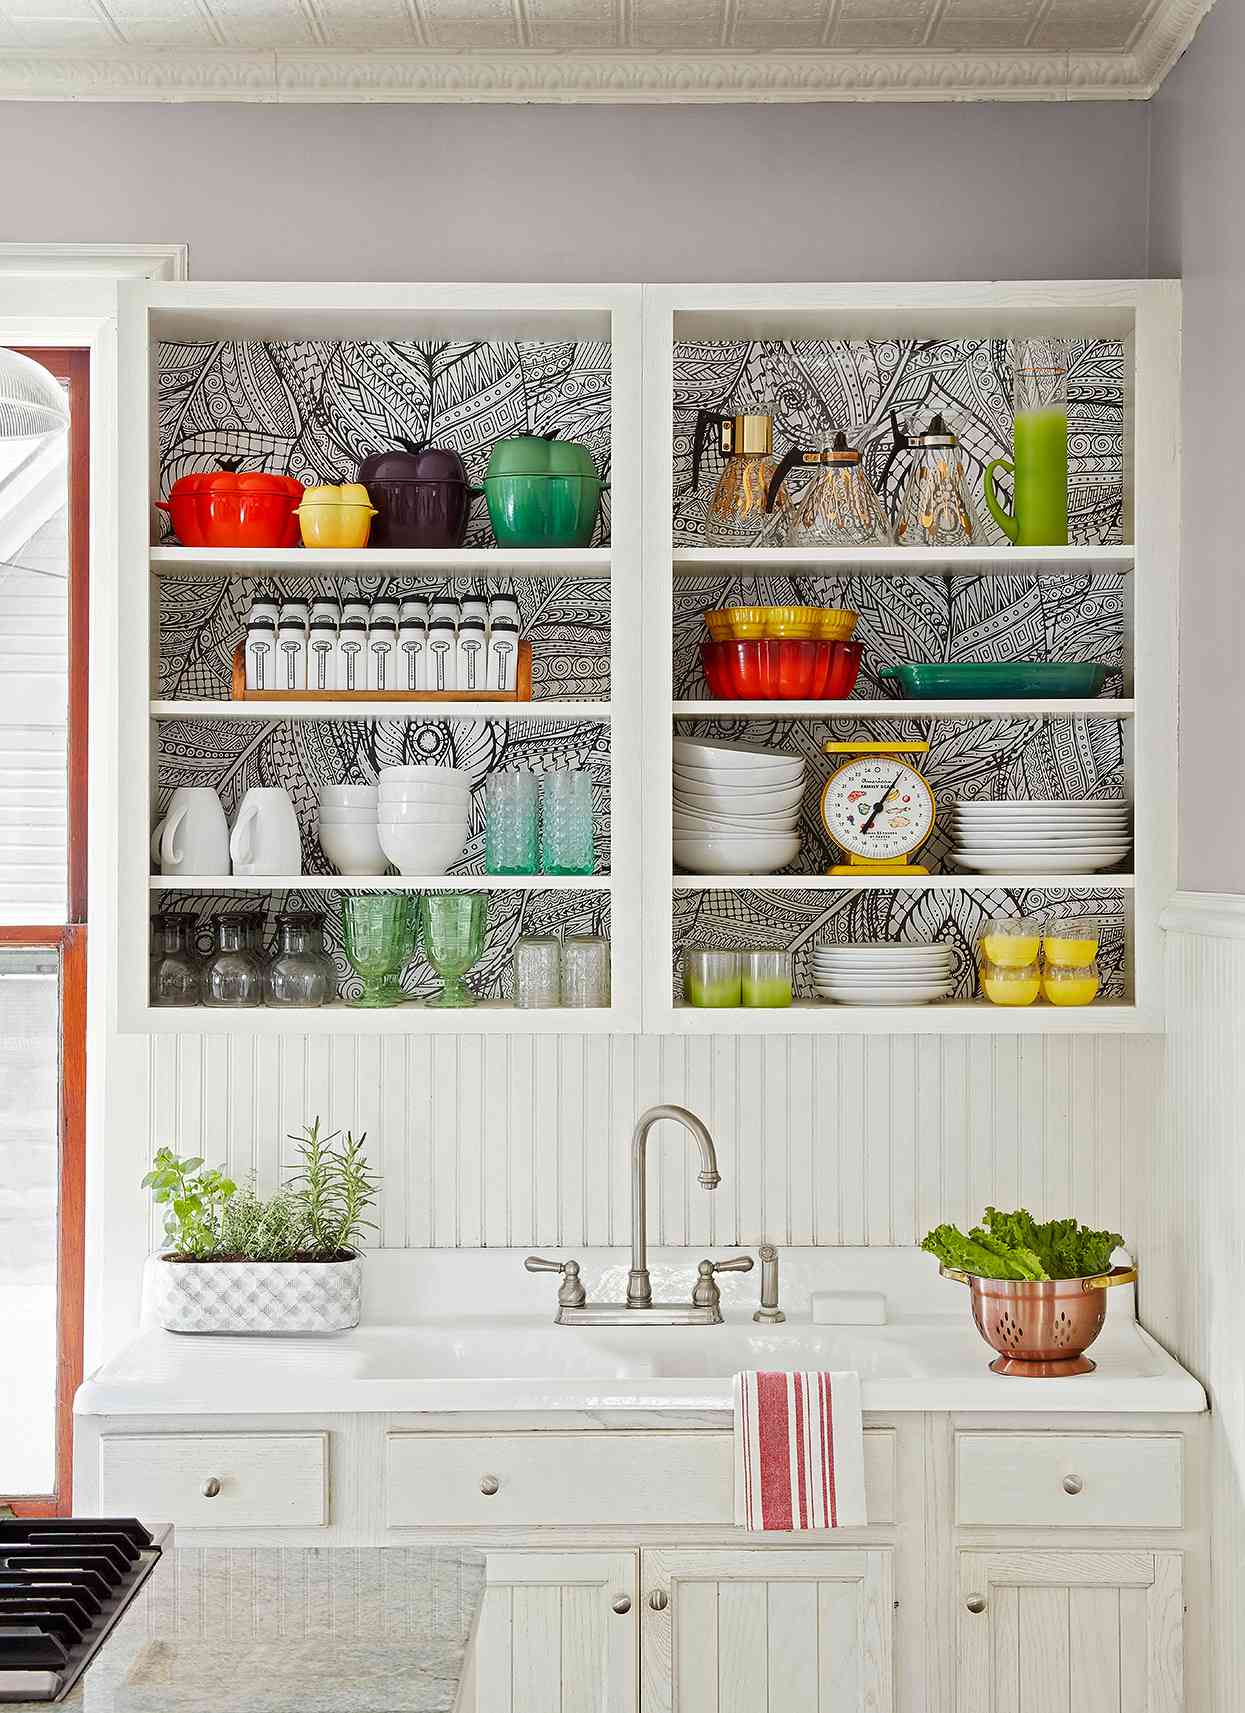 31 Creative Ways To Dishes And, How To Arrange Utensils In Small Kitchen Cabinets Ideas